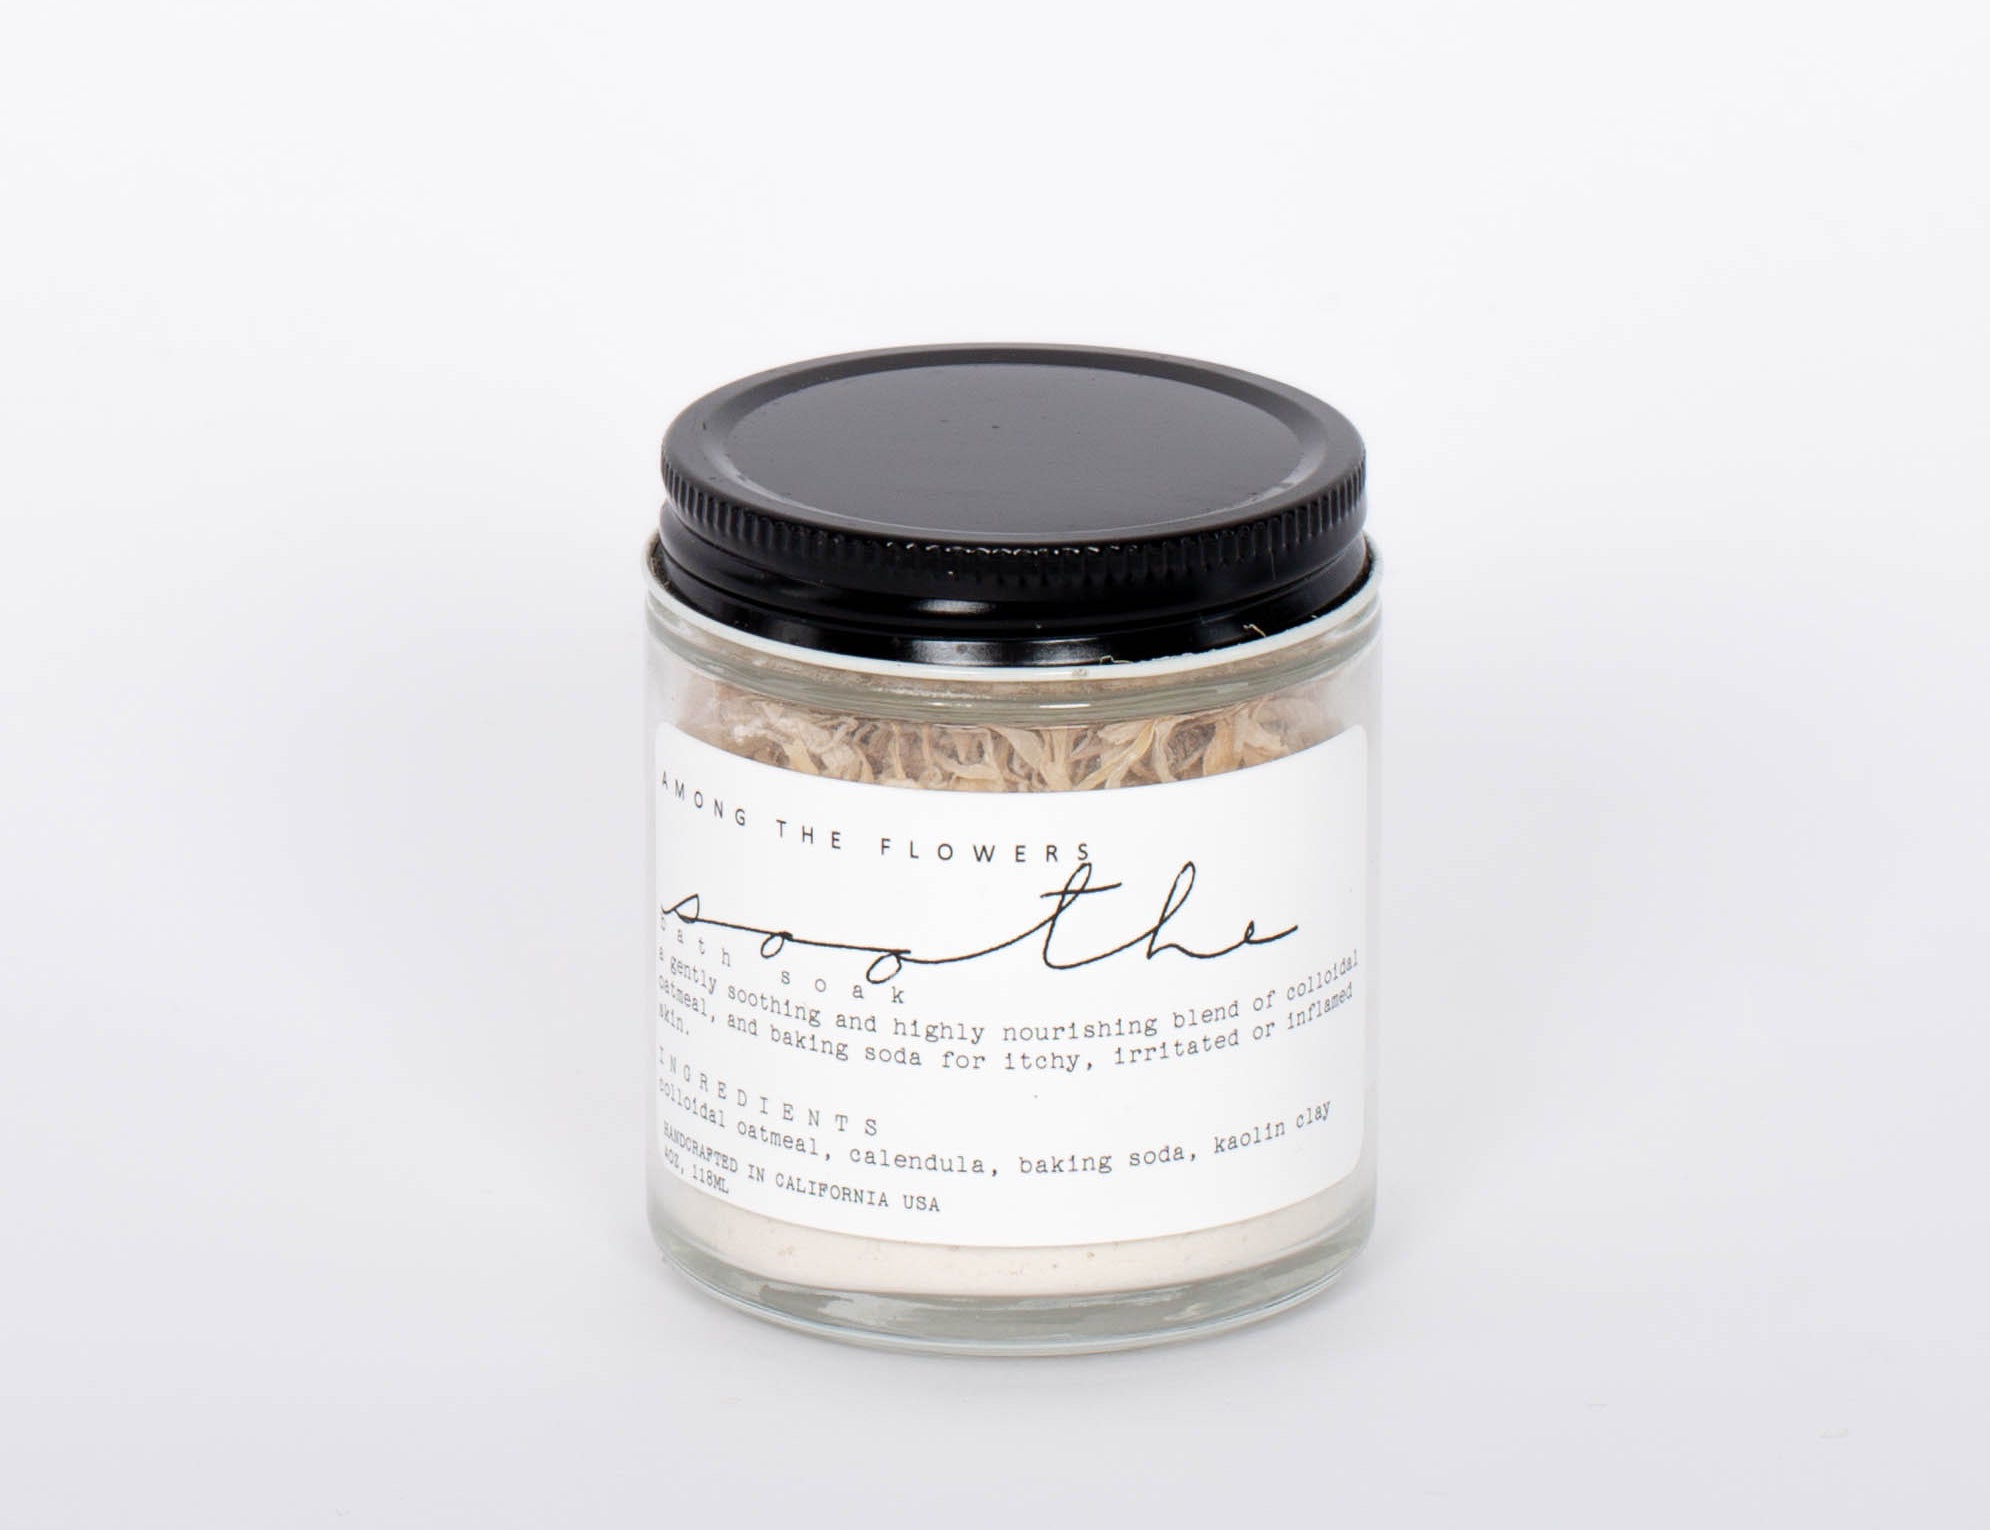 Among the Flowers Soothe Bath Soak. S O O T H E  A blend of colloidal oats, coconut milk, and chamomile petals that effectively soothes inflammation and irritation related to minor scrapes and scratches, as well as rashes or bug bites. This is particularly helpful for dry skin, or issues with diaper rash.